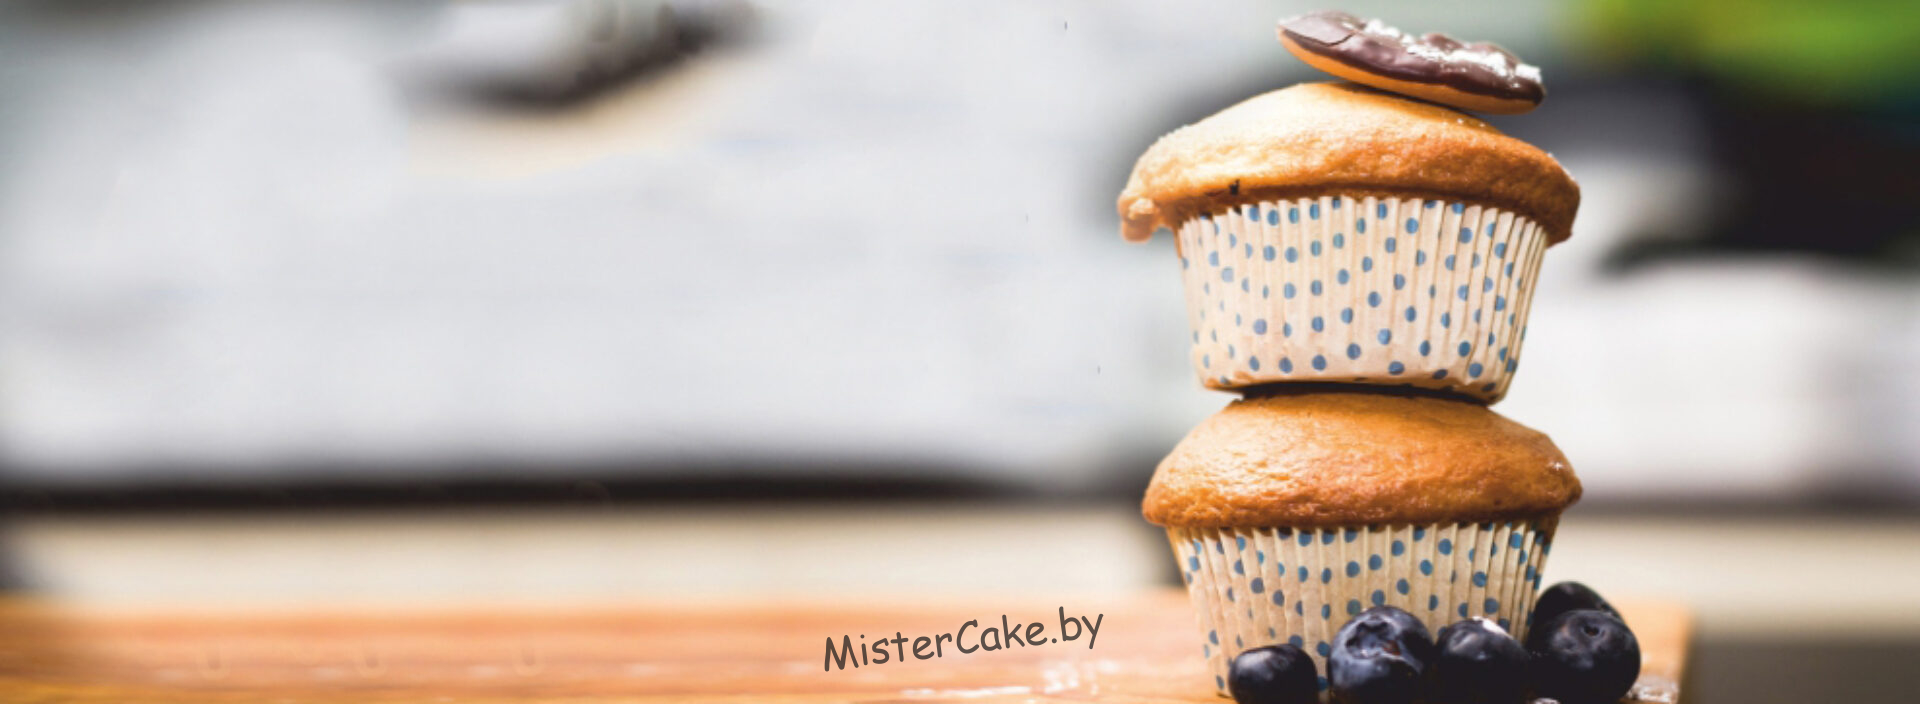 Mistercake.by